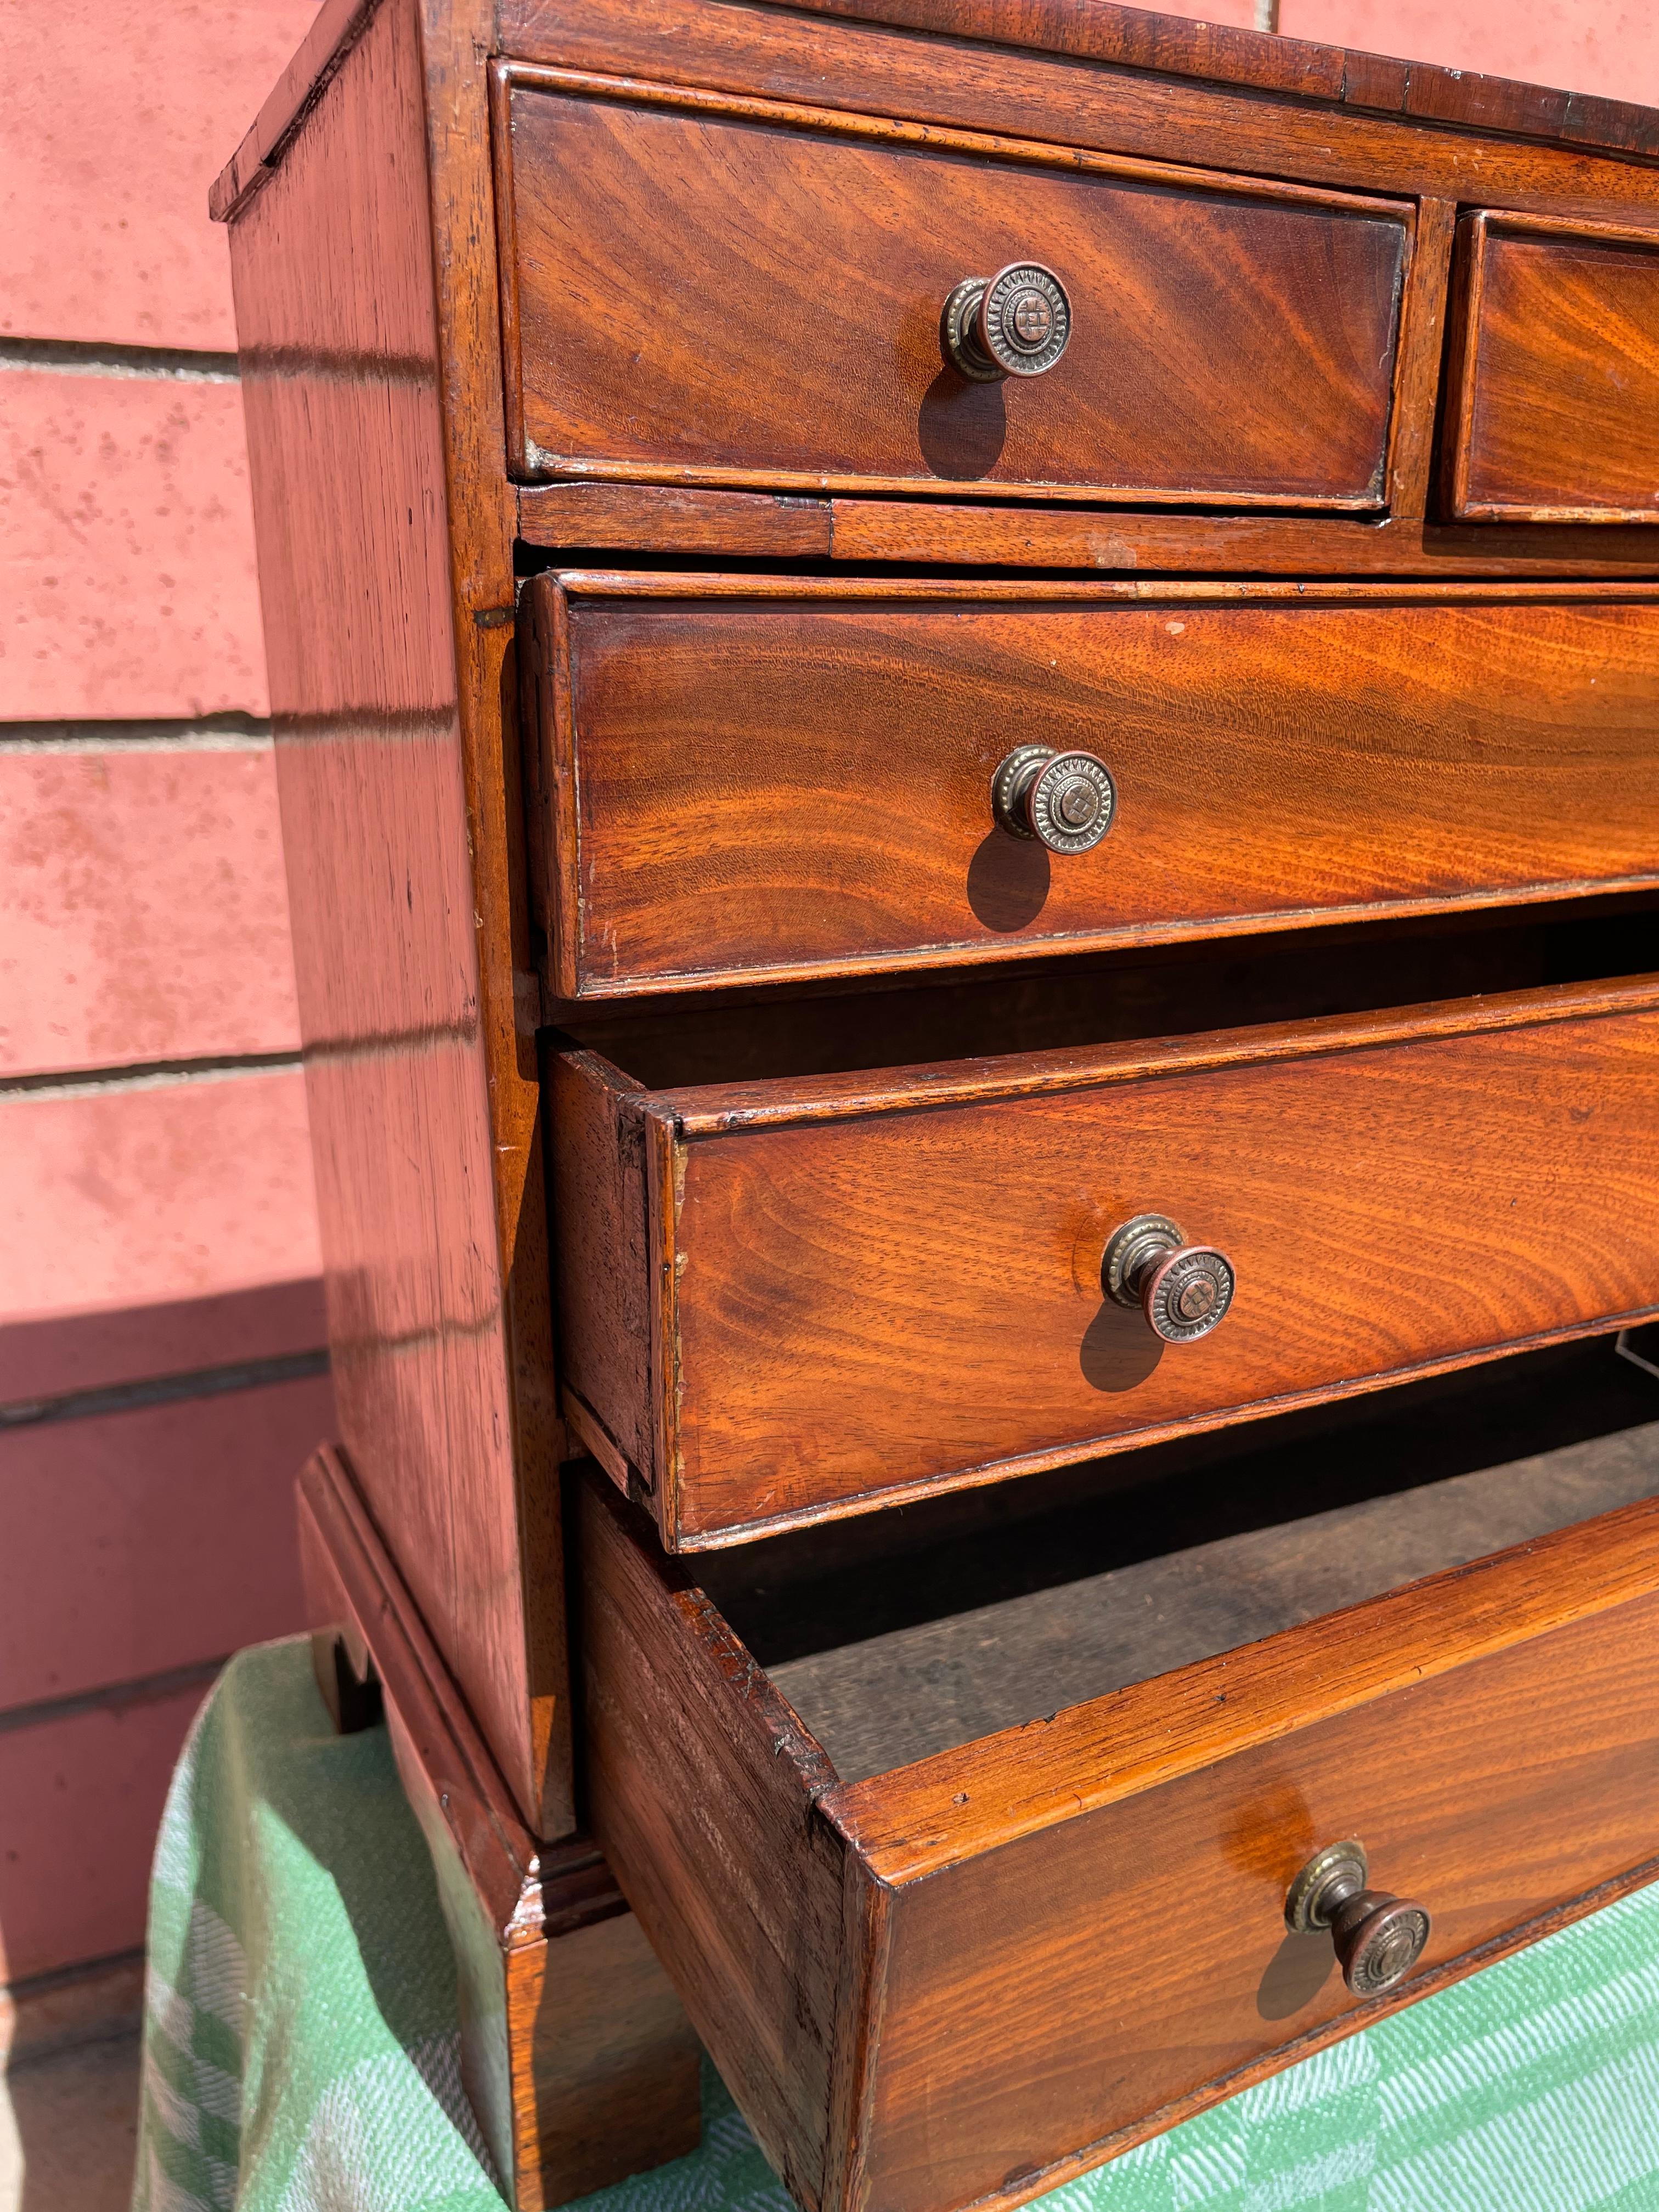 Miniature 19th Century Chest of Drawers In Good Condition For Sale In Los Angeles, CA